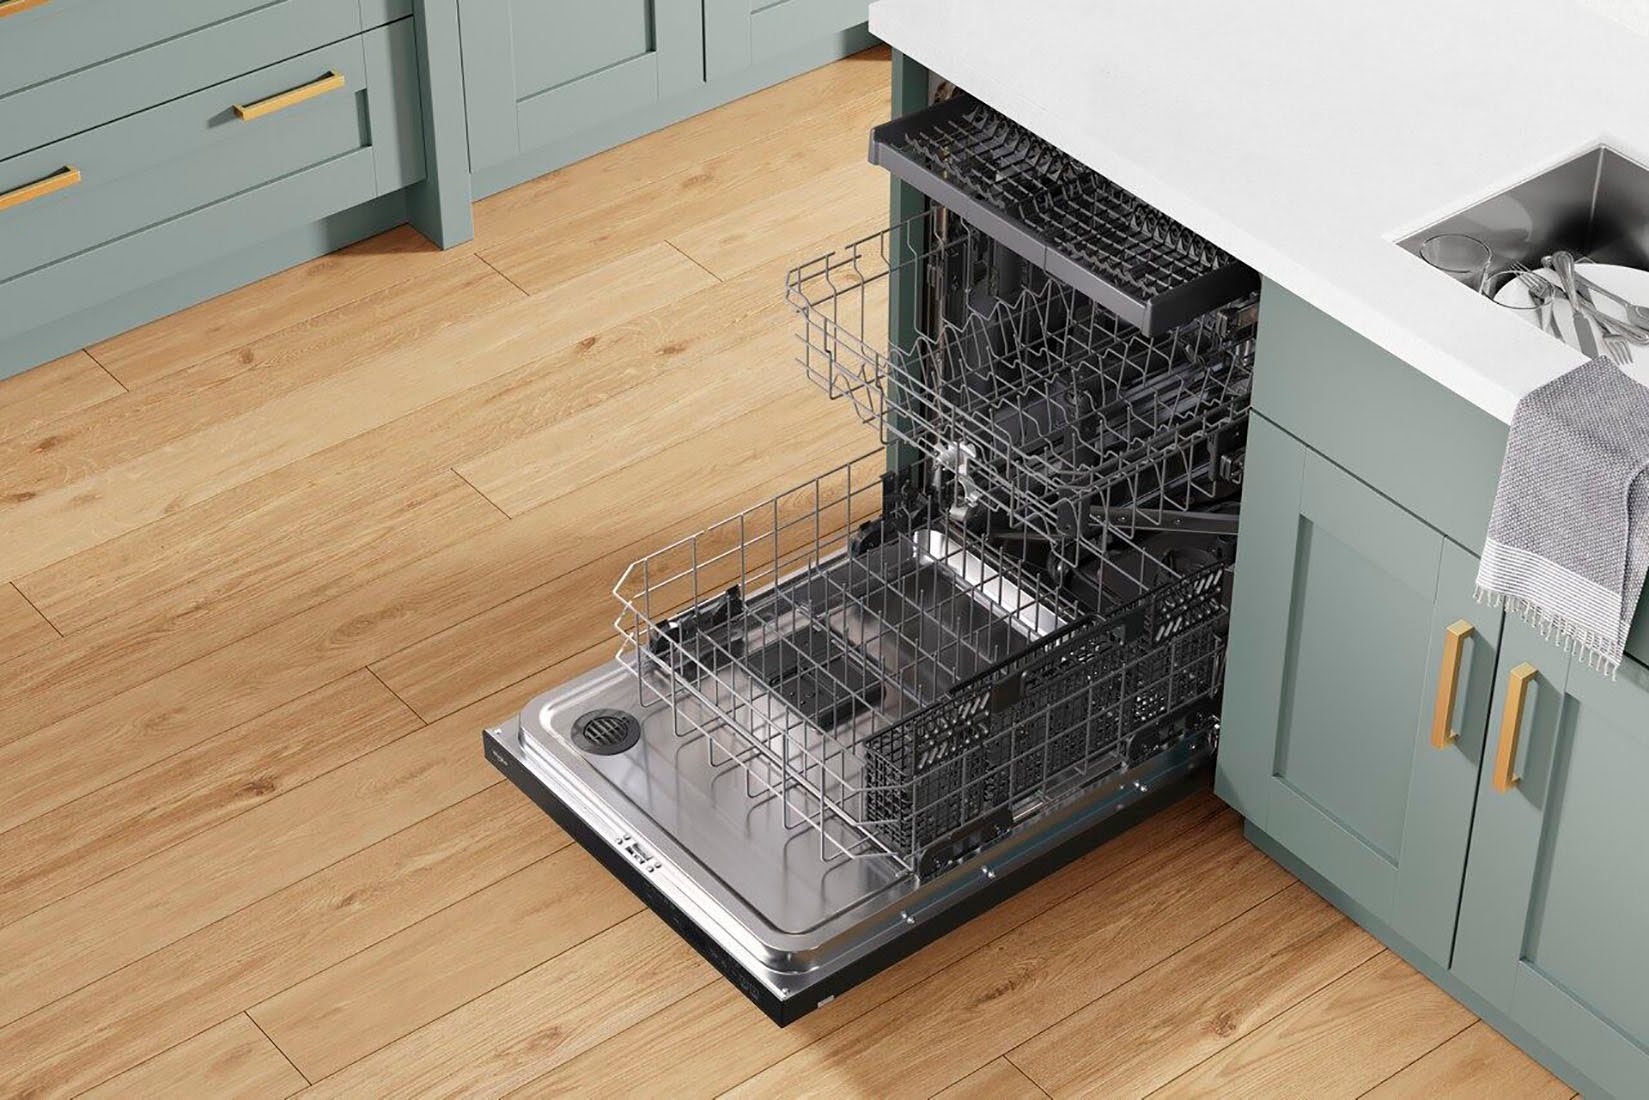 How To Fix The Error Code 45262 For Whirlpool Dishwasher